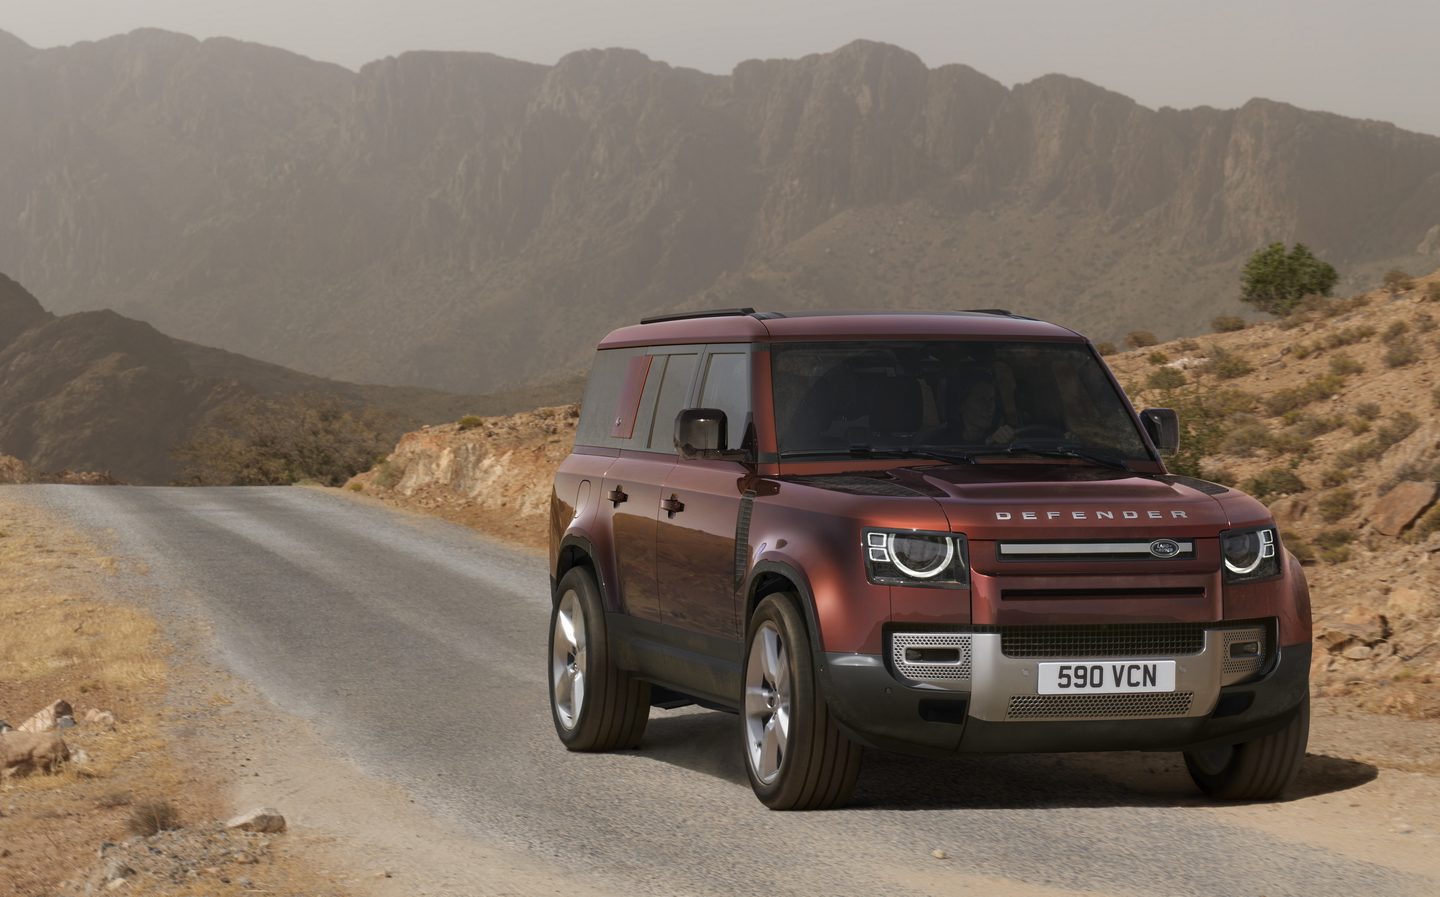 Land Rover Defender 130 review 2023: It's the size that counts